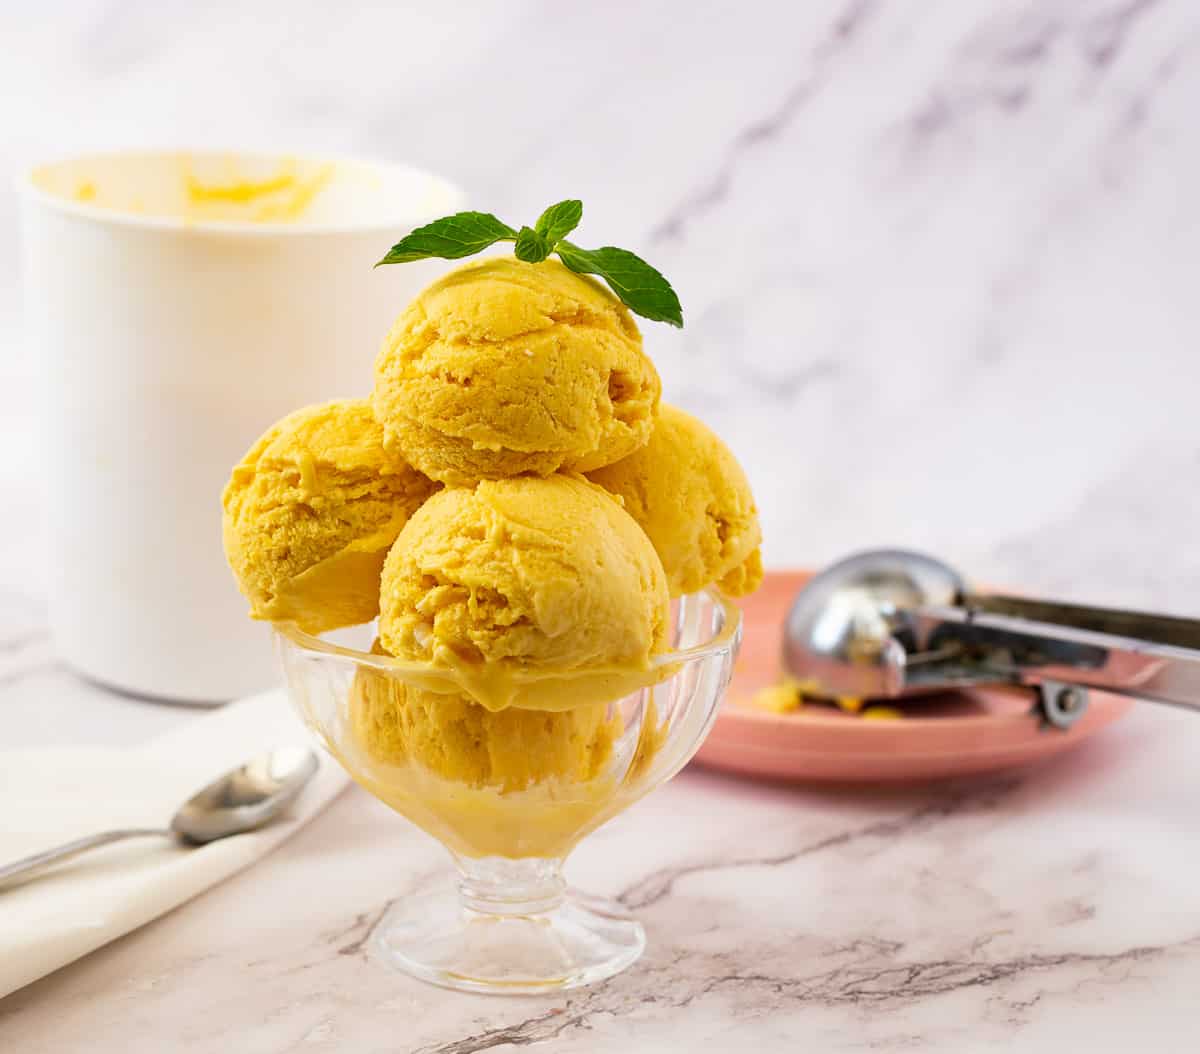 Scoops of mango ice cream in a bowl.